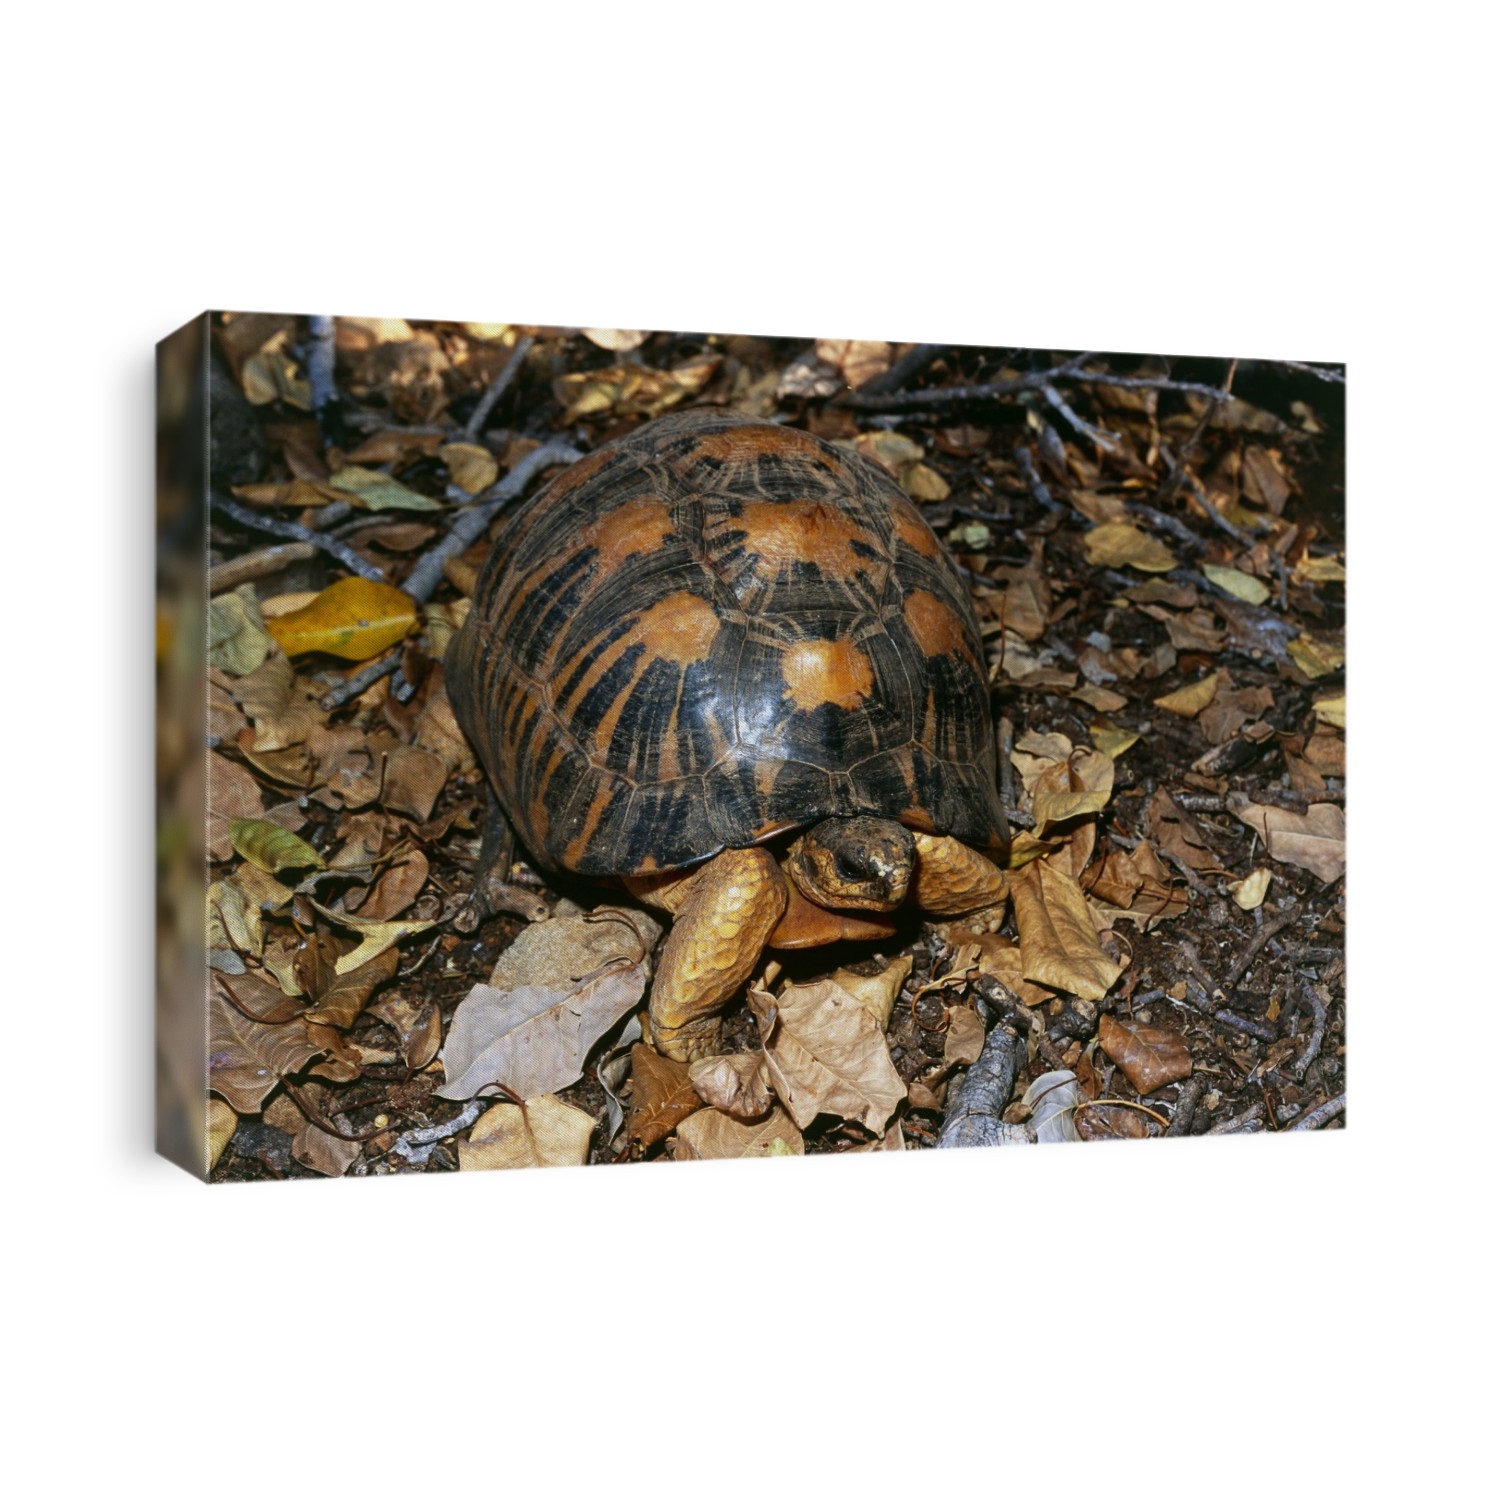 Radiated tortoise (Geochelone radiata) crawling across a forest floor in the Tsimanampetsotsa National Park in south west Madagascar. The radiated tortoise is notable for its dark shell marked with yellow lines which radiate out from the centre of each plate.